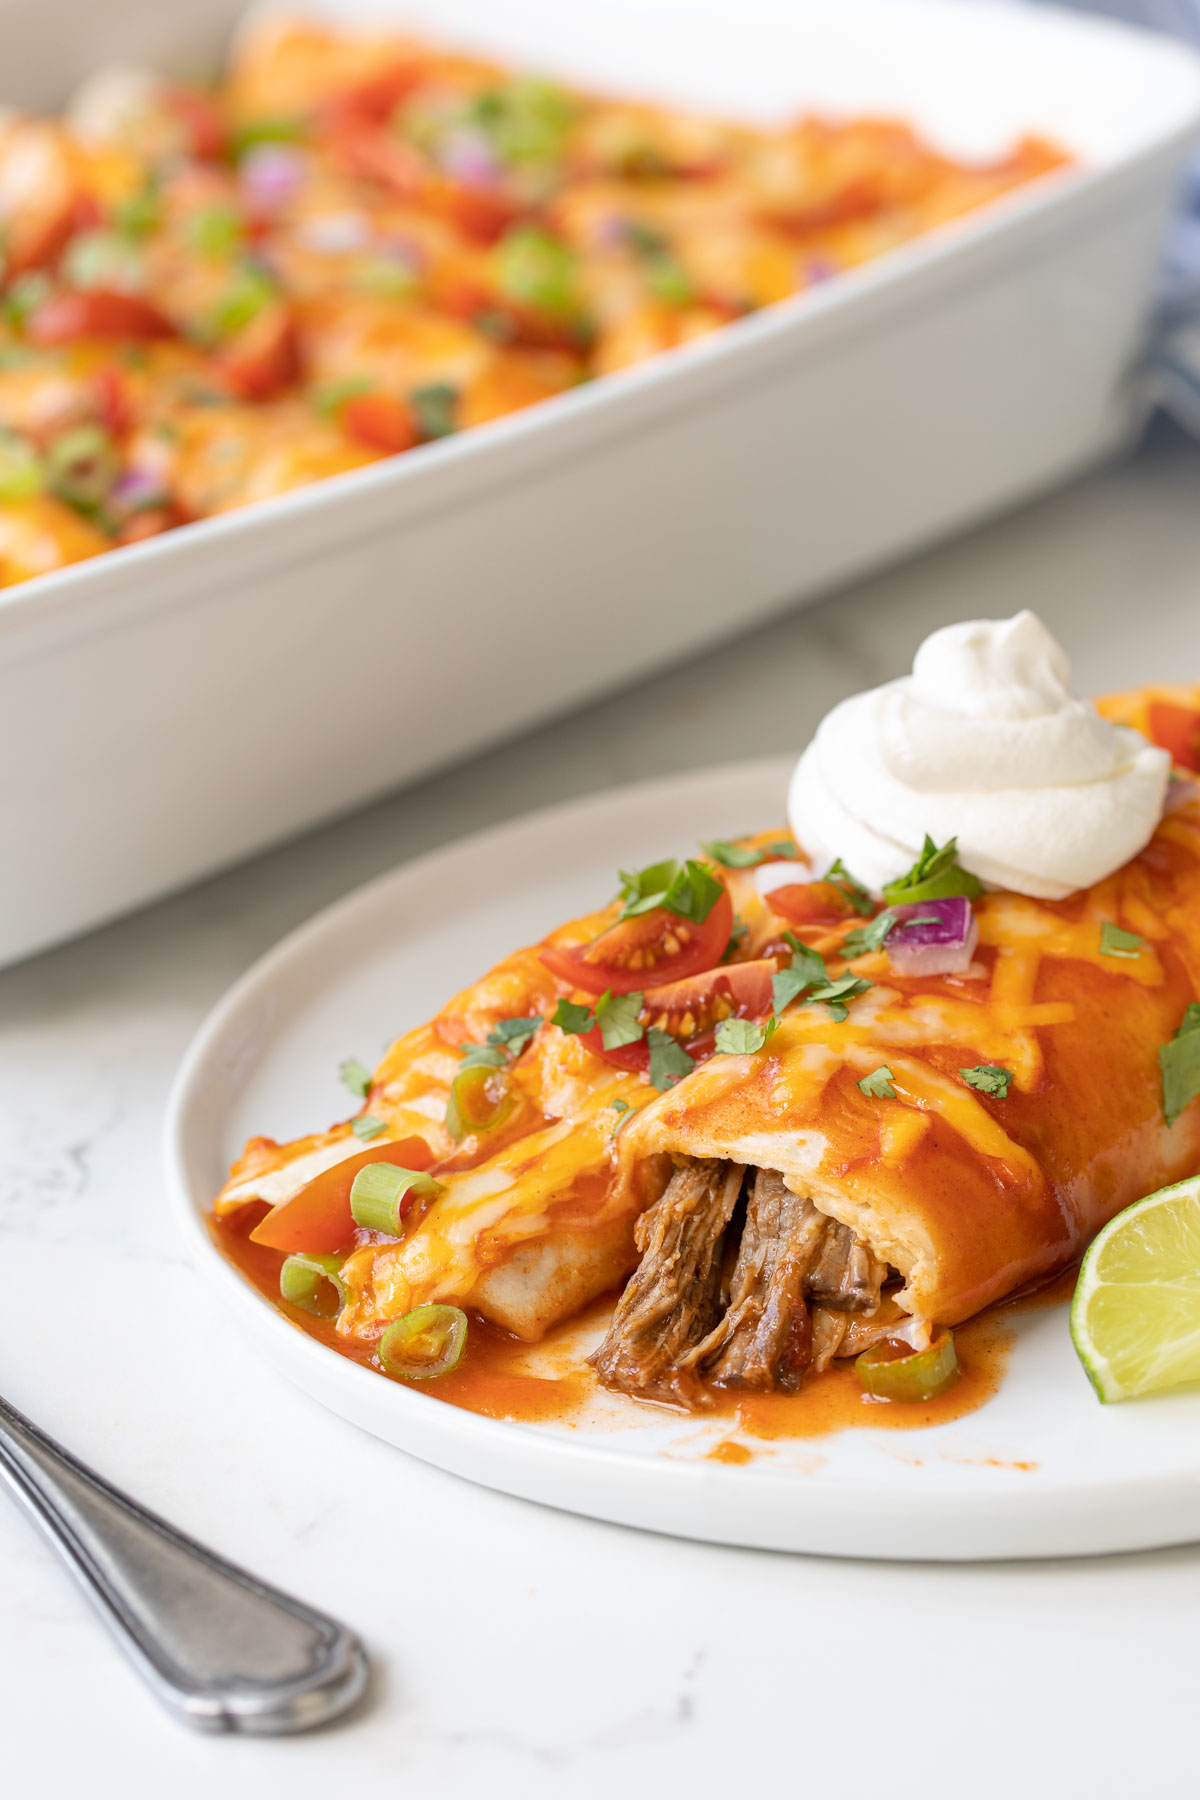 Two shredded beef enchiladas topped with sour cream on a white plate.